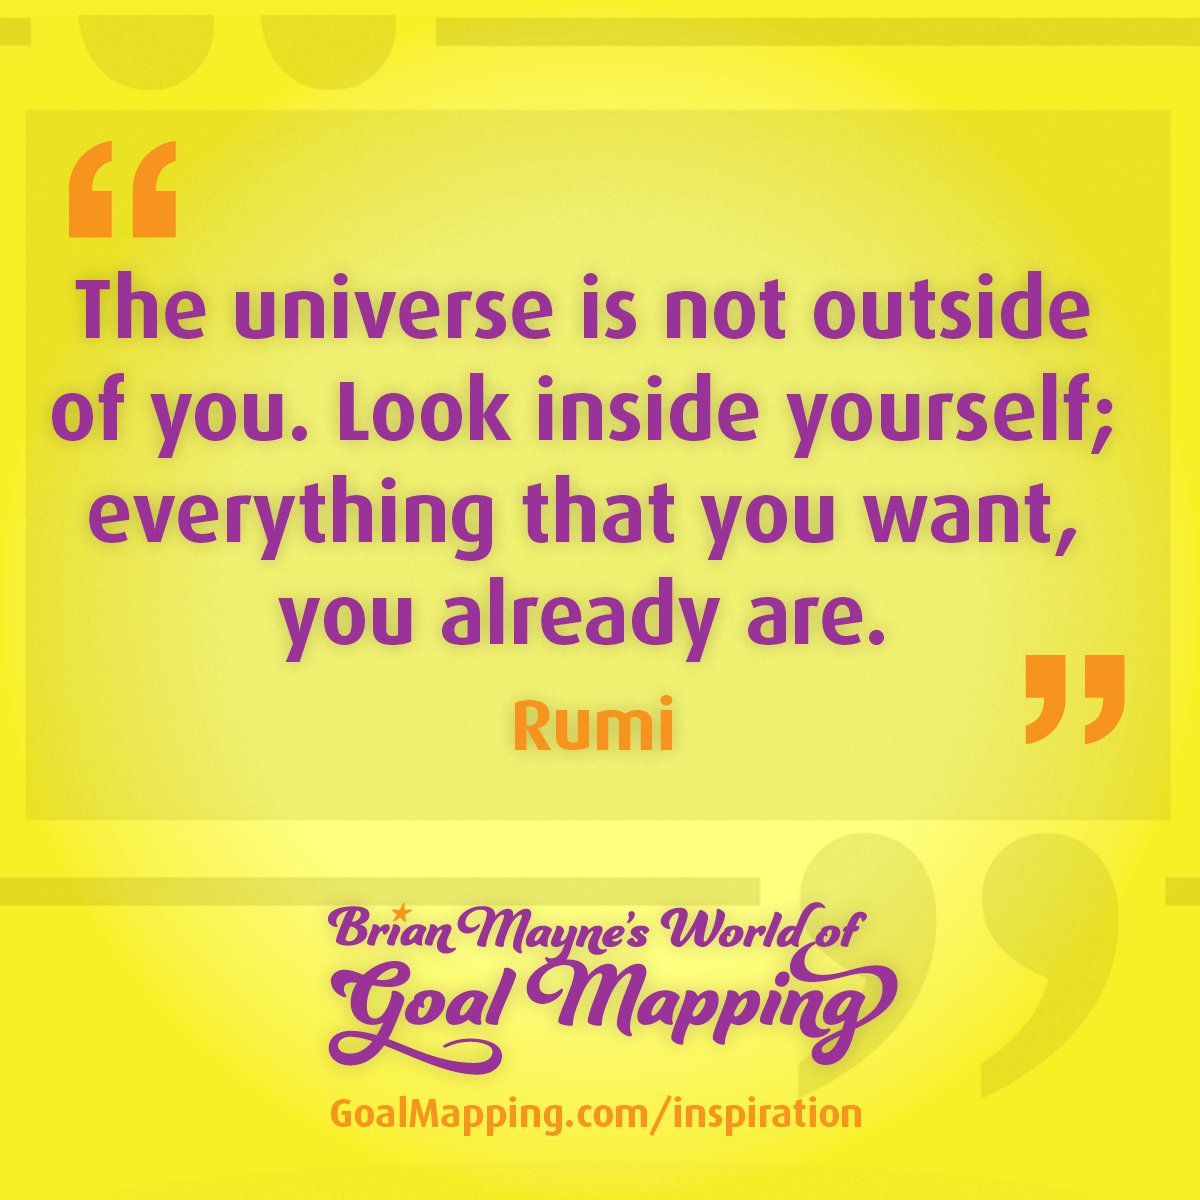 "The universe is not outside of you. Look inside yourself; everything that you want, you already are." Rumi